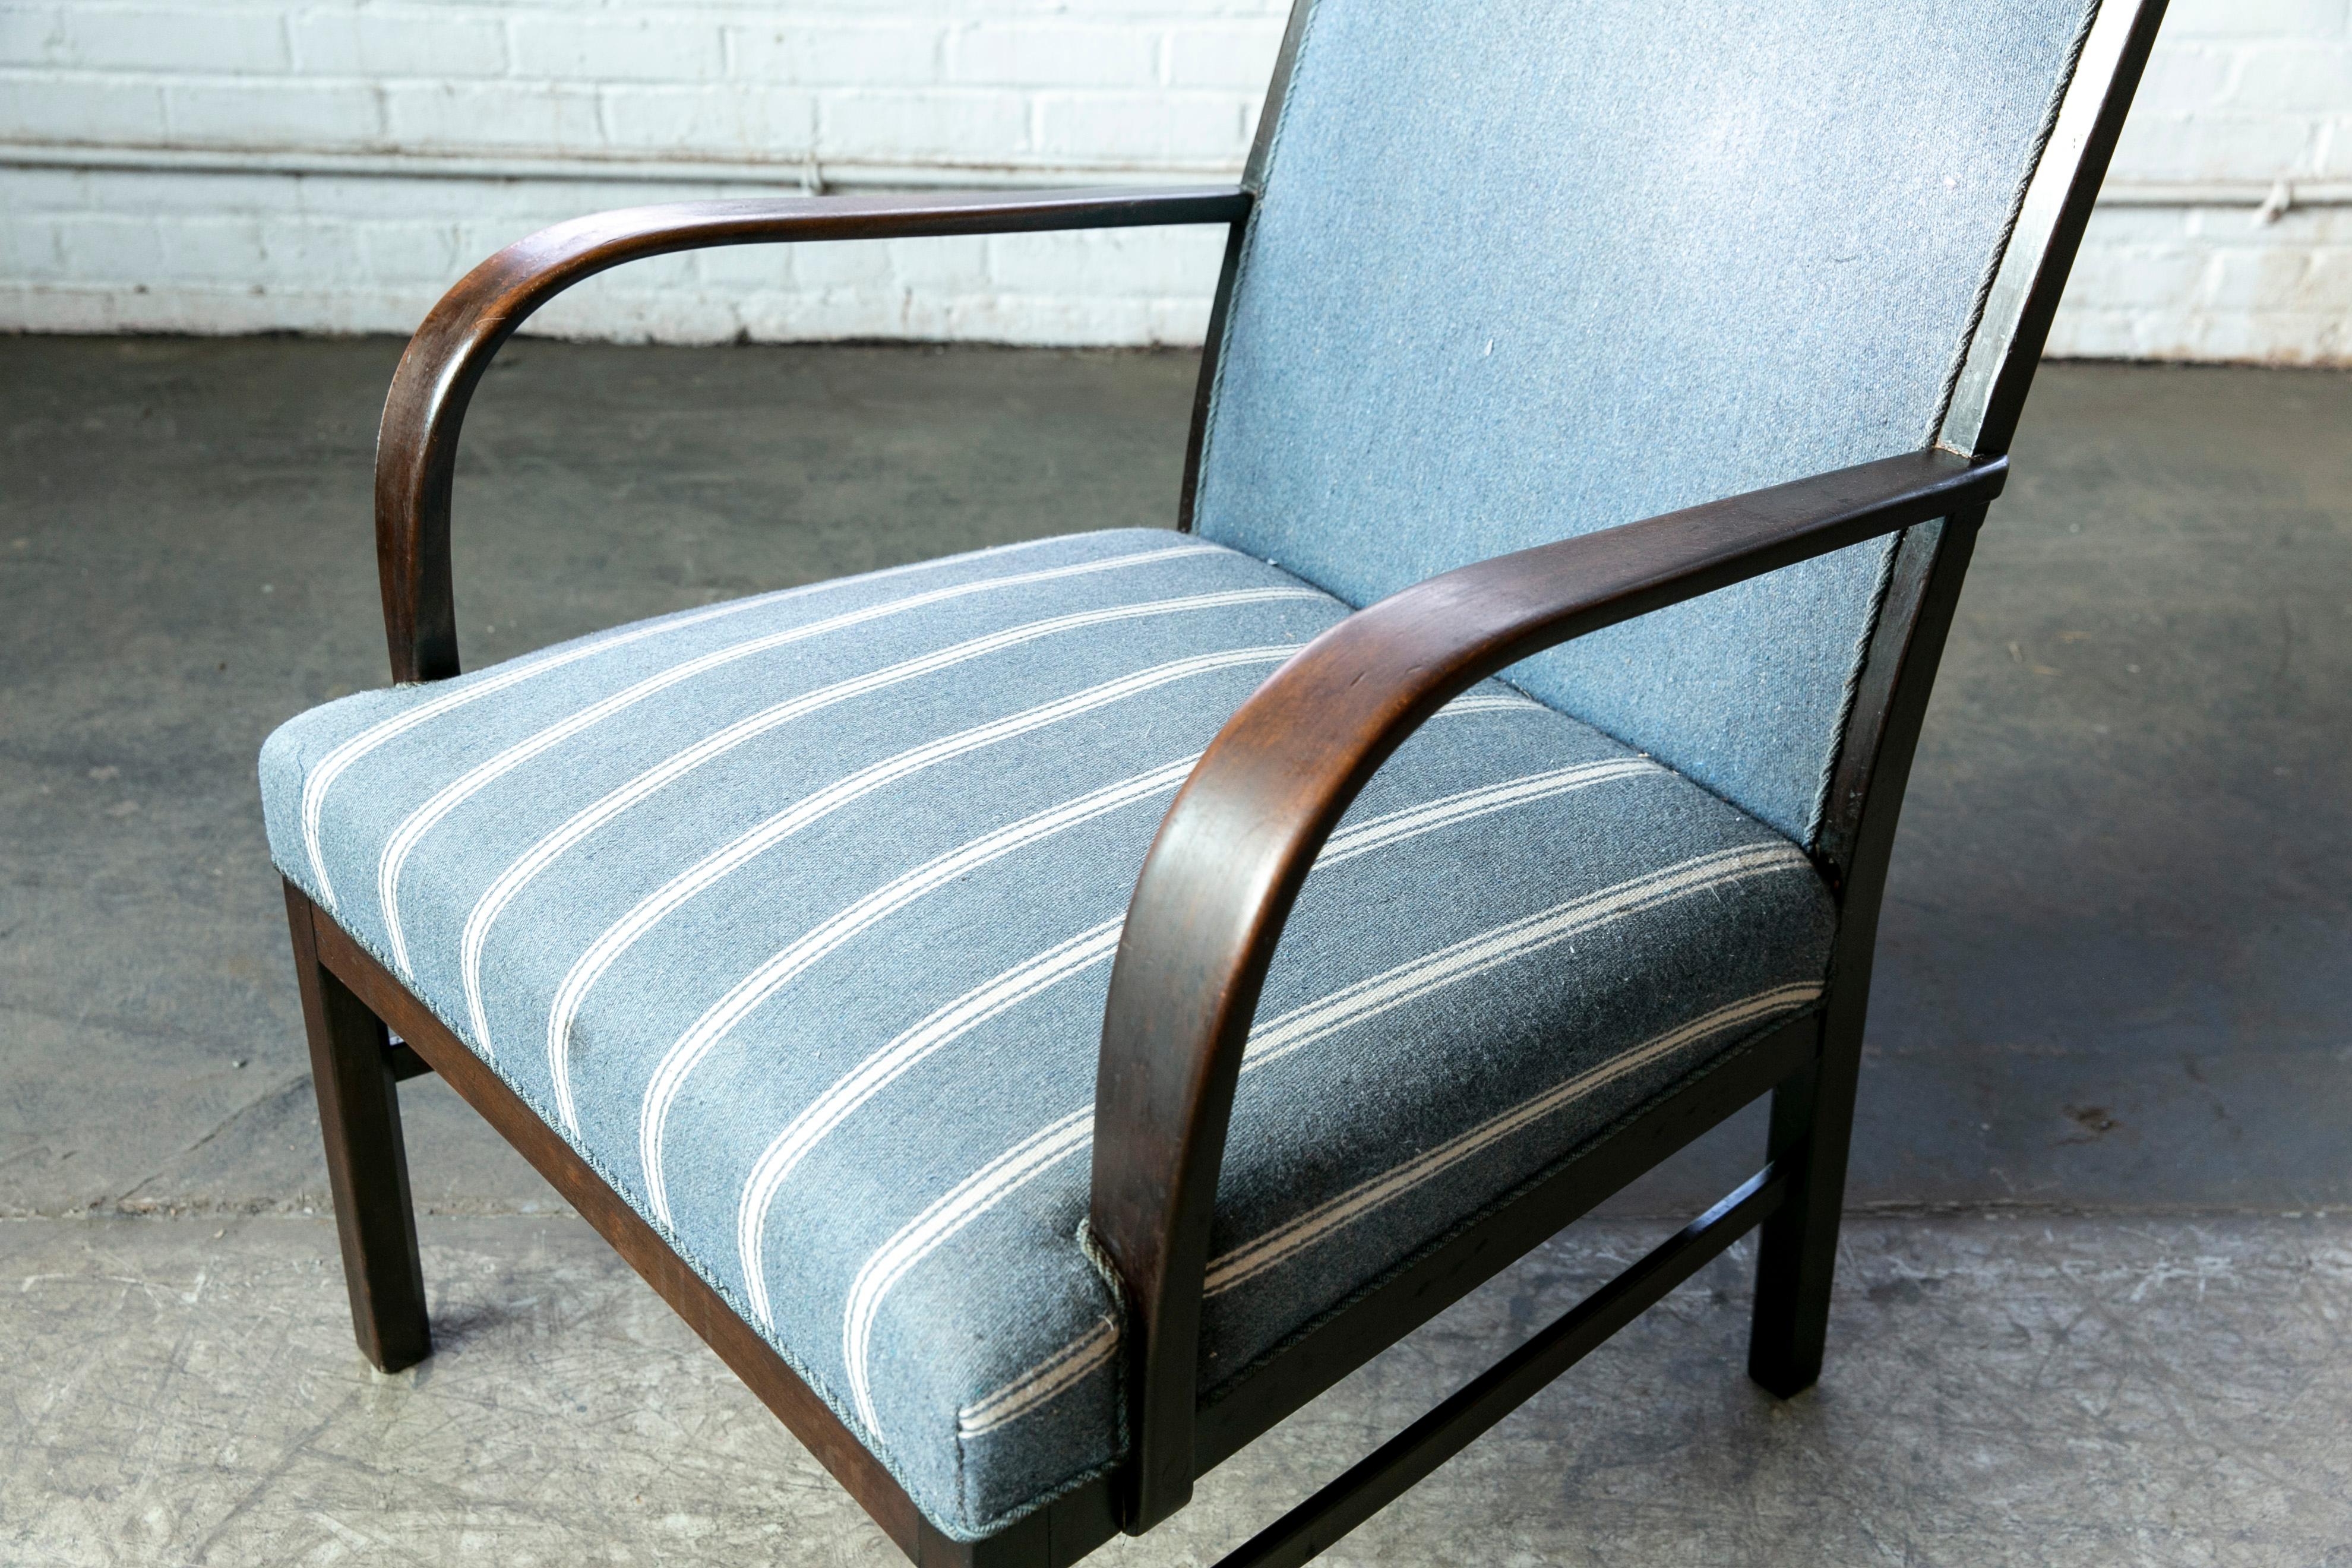 Pair of Danish Early Midcentury or Art Deco Low Lounge Chairs Mahagony, 1940's For Sale 3